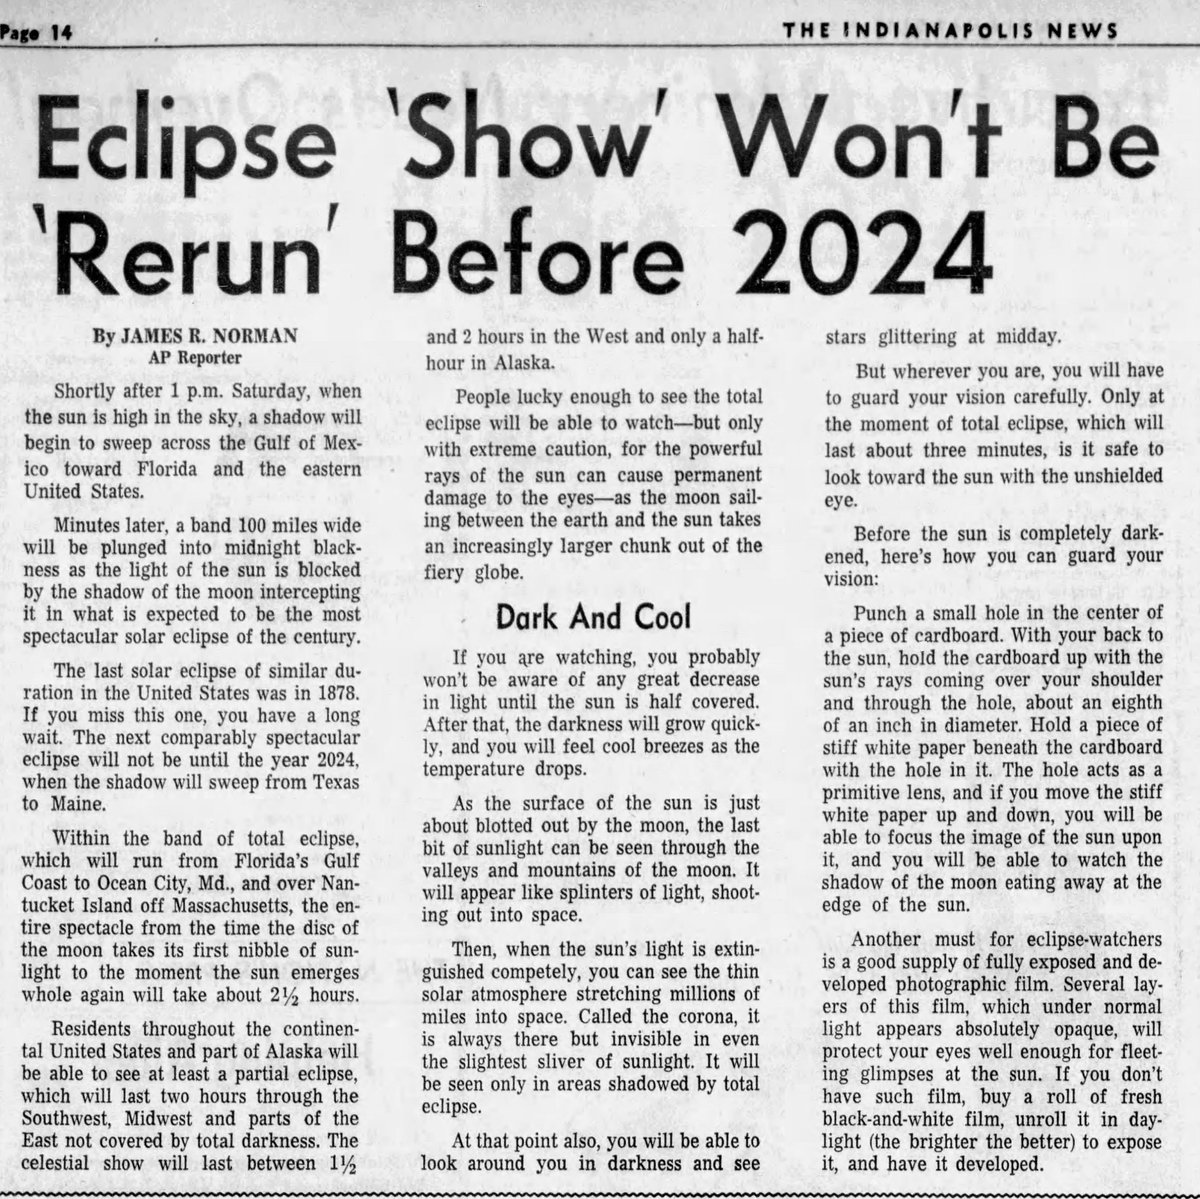 An Indianapolis news clip from March 1970 mentioning the next total solar eclipse in 2024... and a warning to not look directly at the eclipse! Have a good afternoon and enjoy the celestial show! 🌞🌙🌘🌝